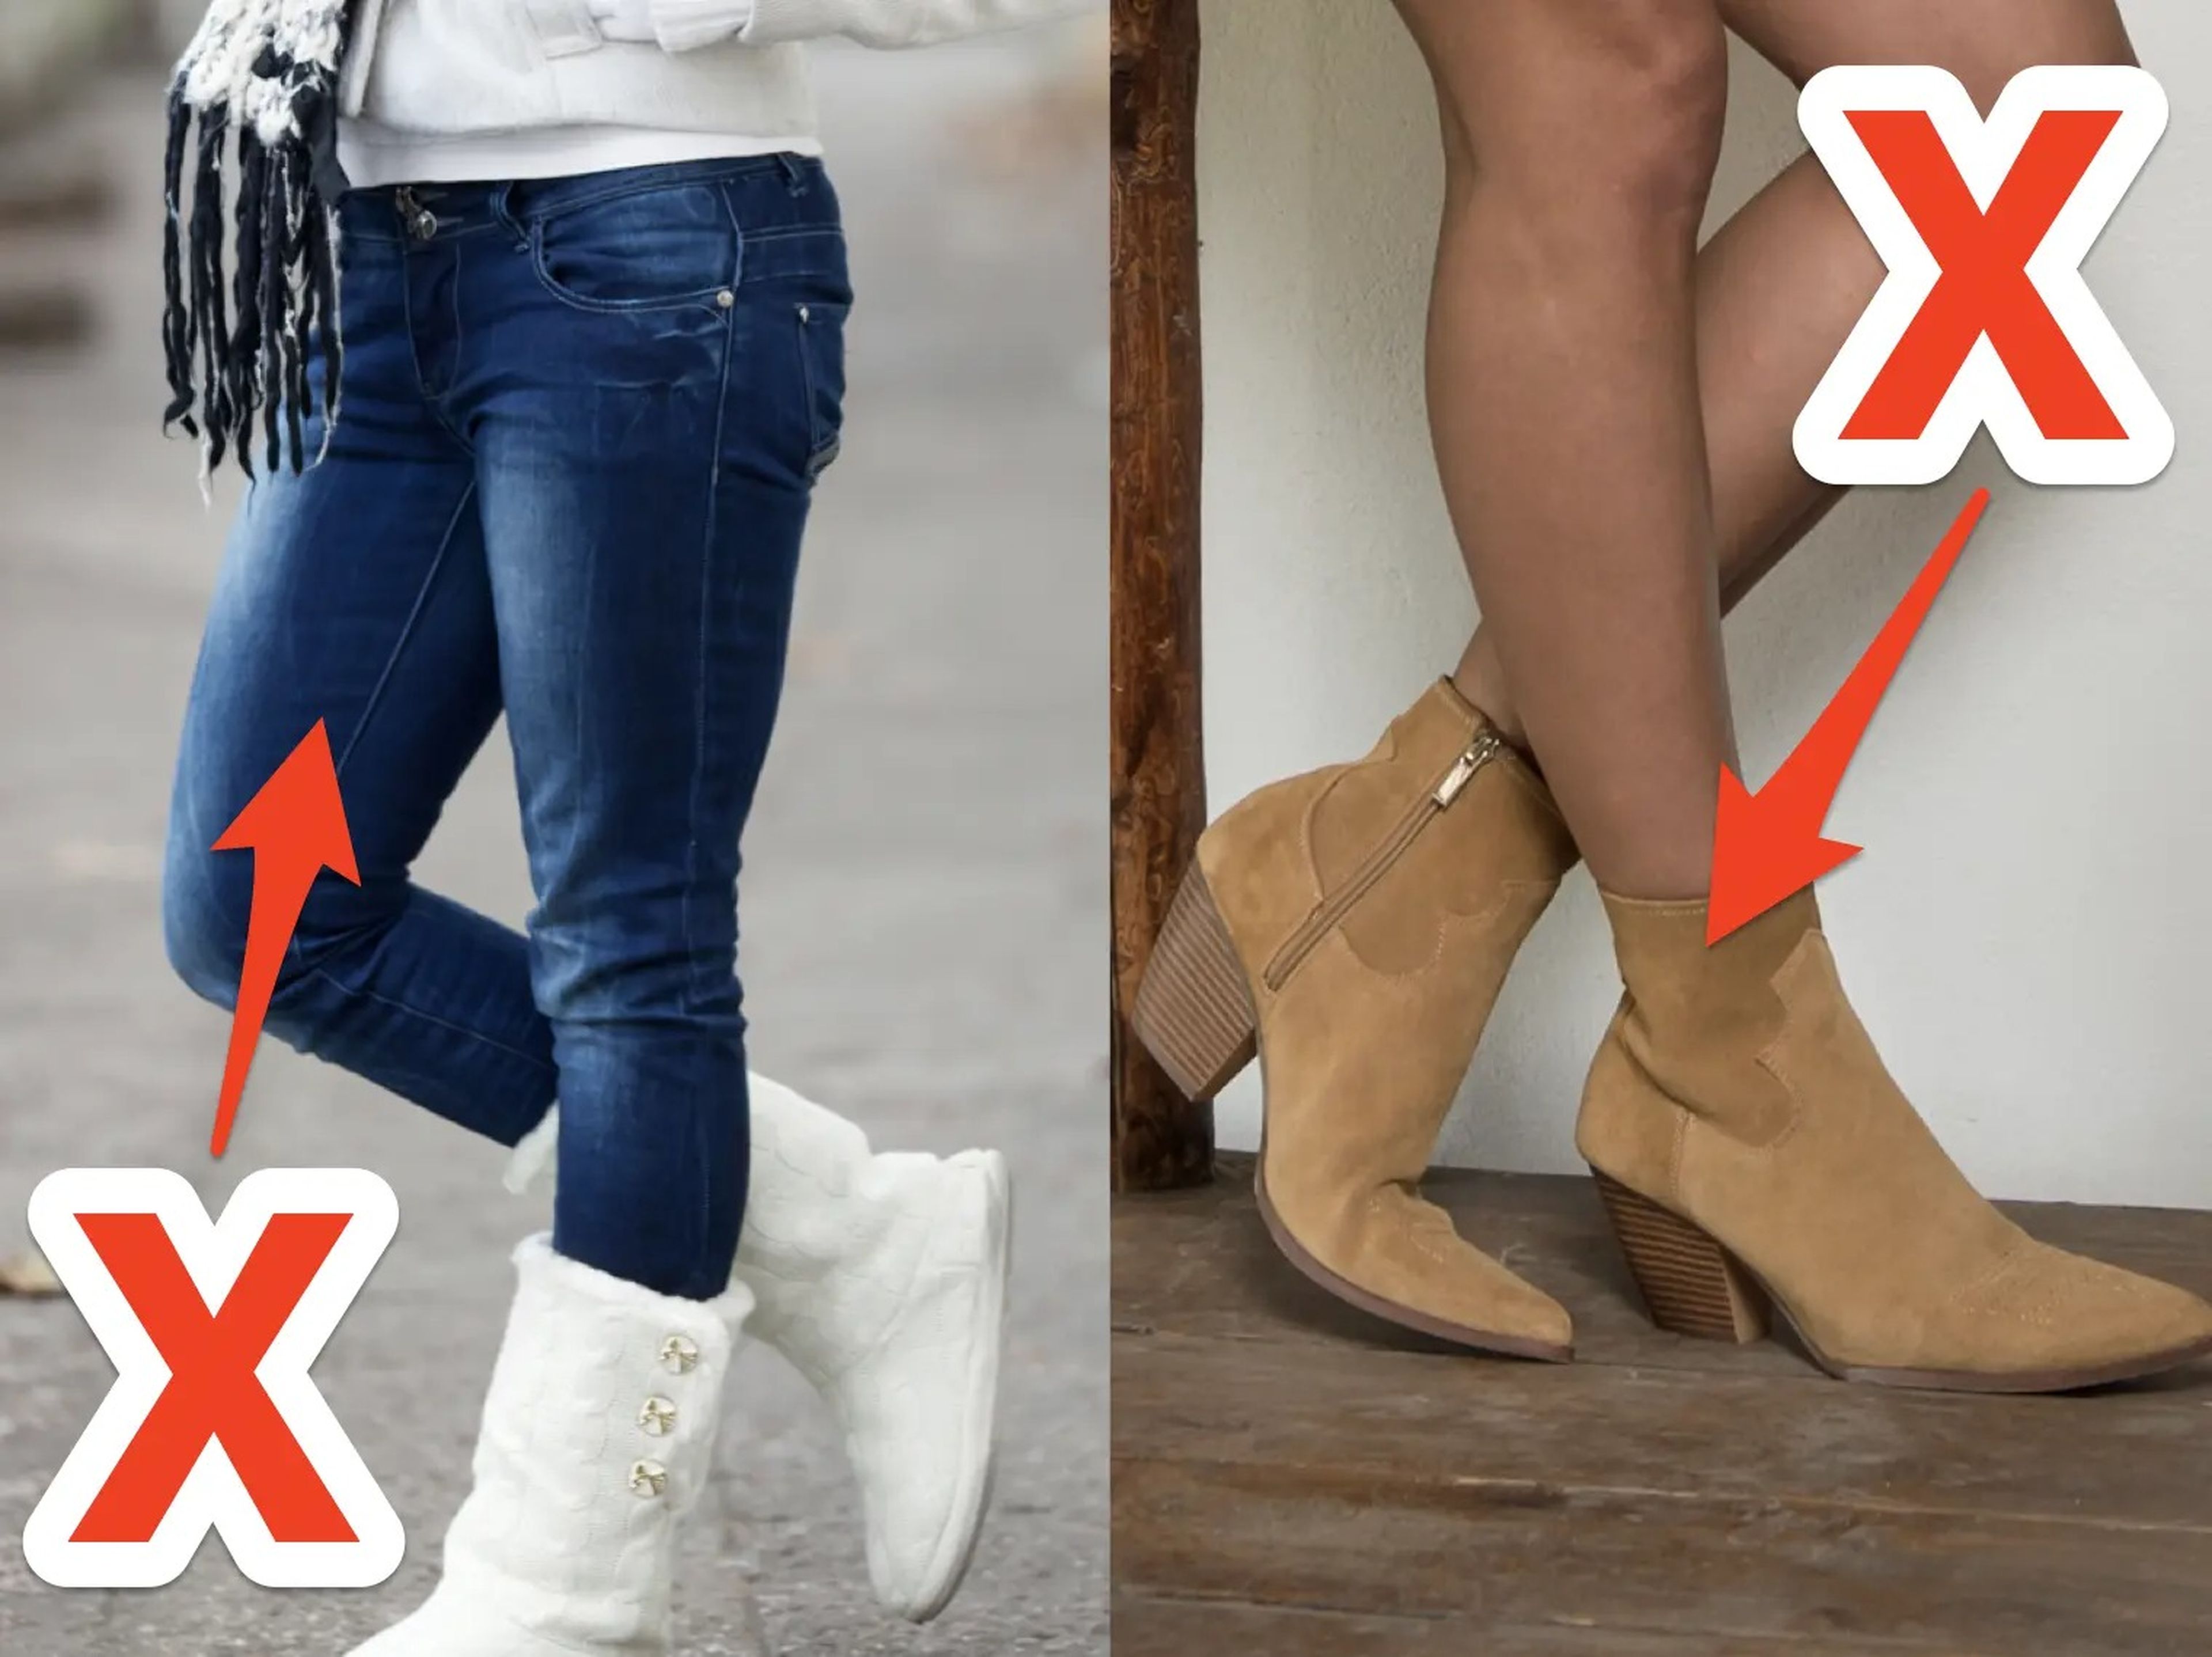 red x and arrows pointing to low-rise skinny jeans and a red x and arrow pointing to wester-style booties